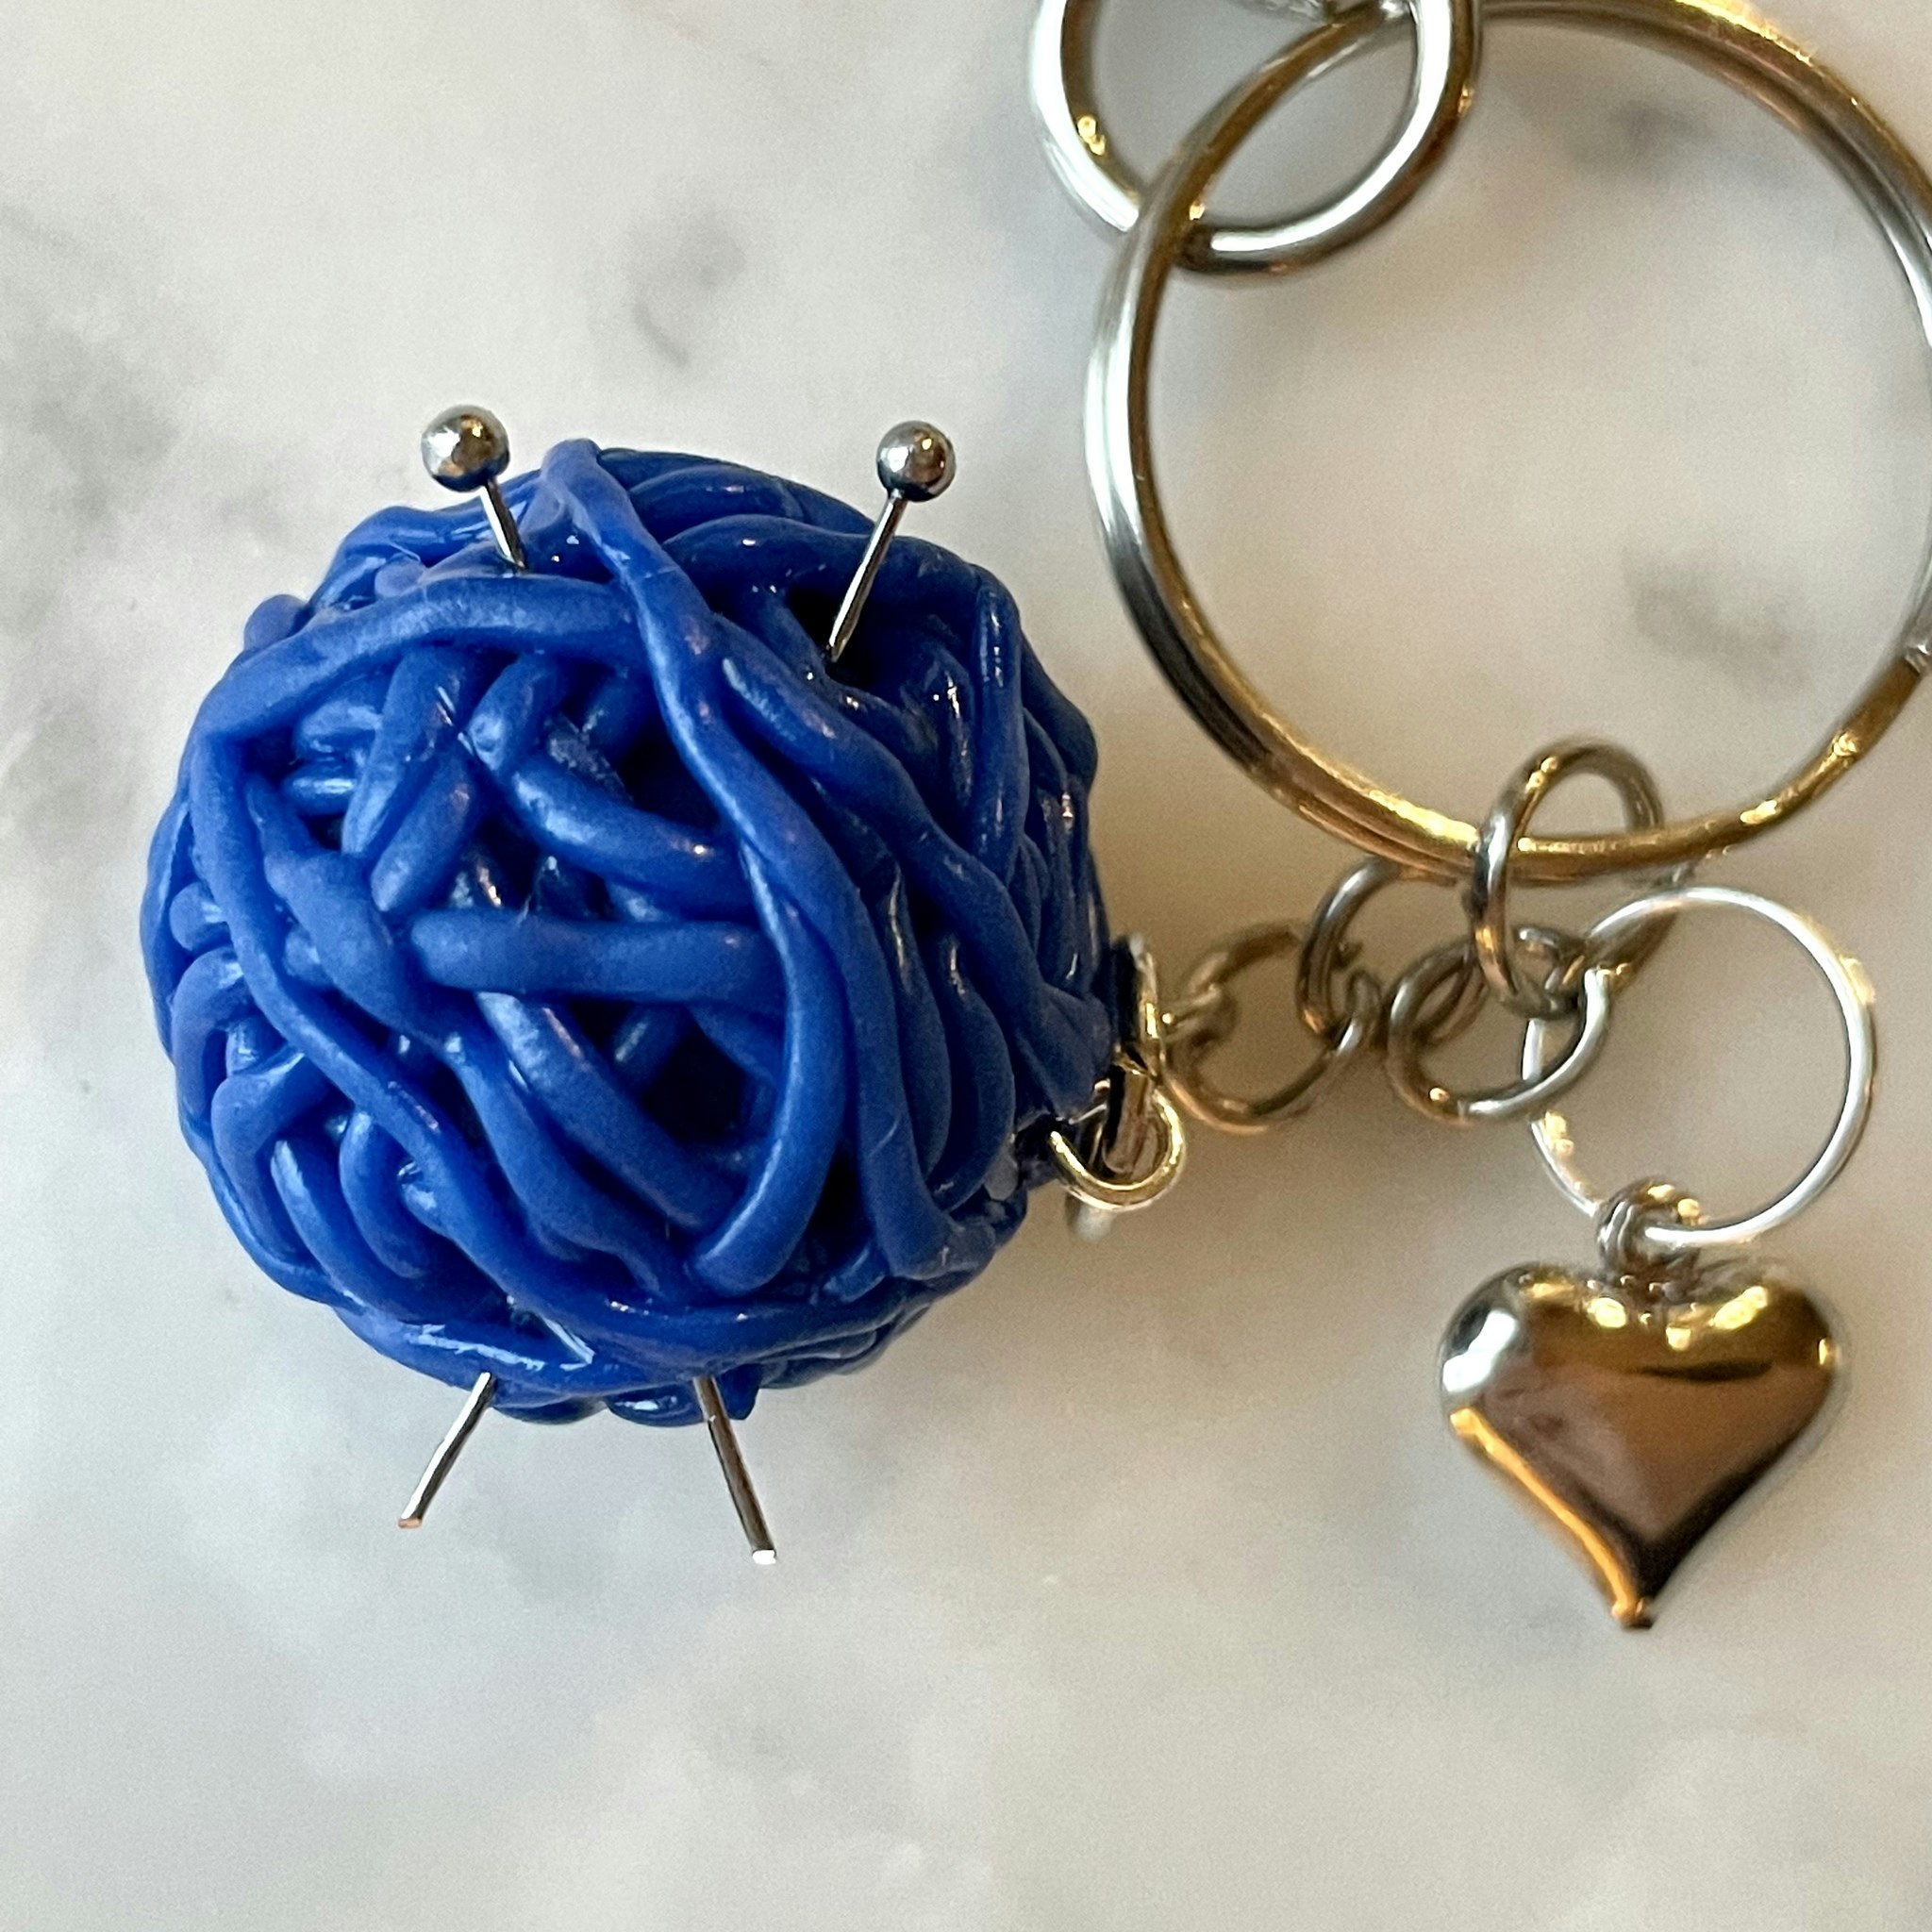 Ball of Yarn Key Chain Silver/Gold - Optional color